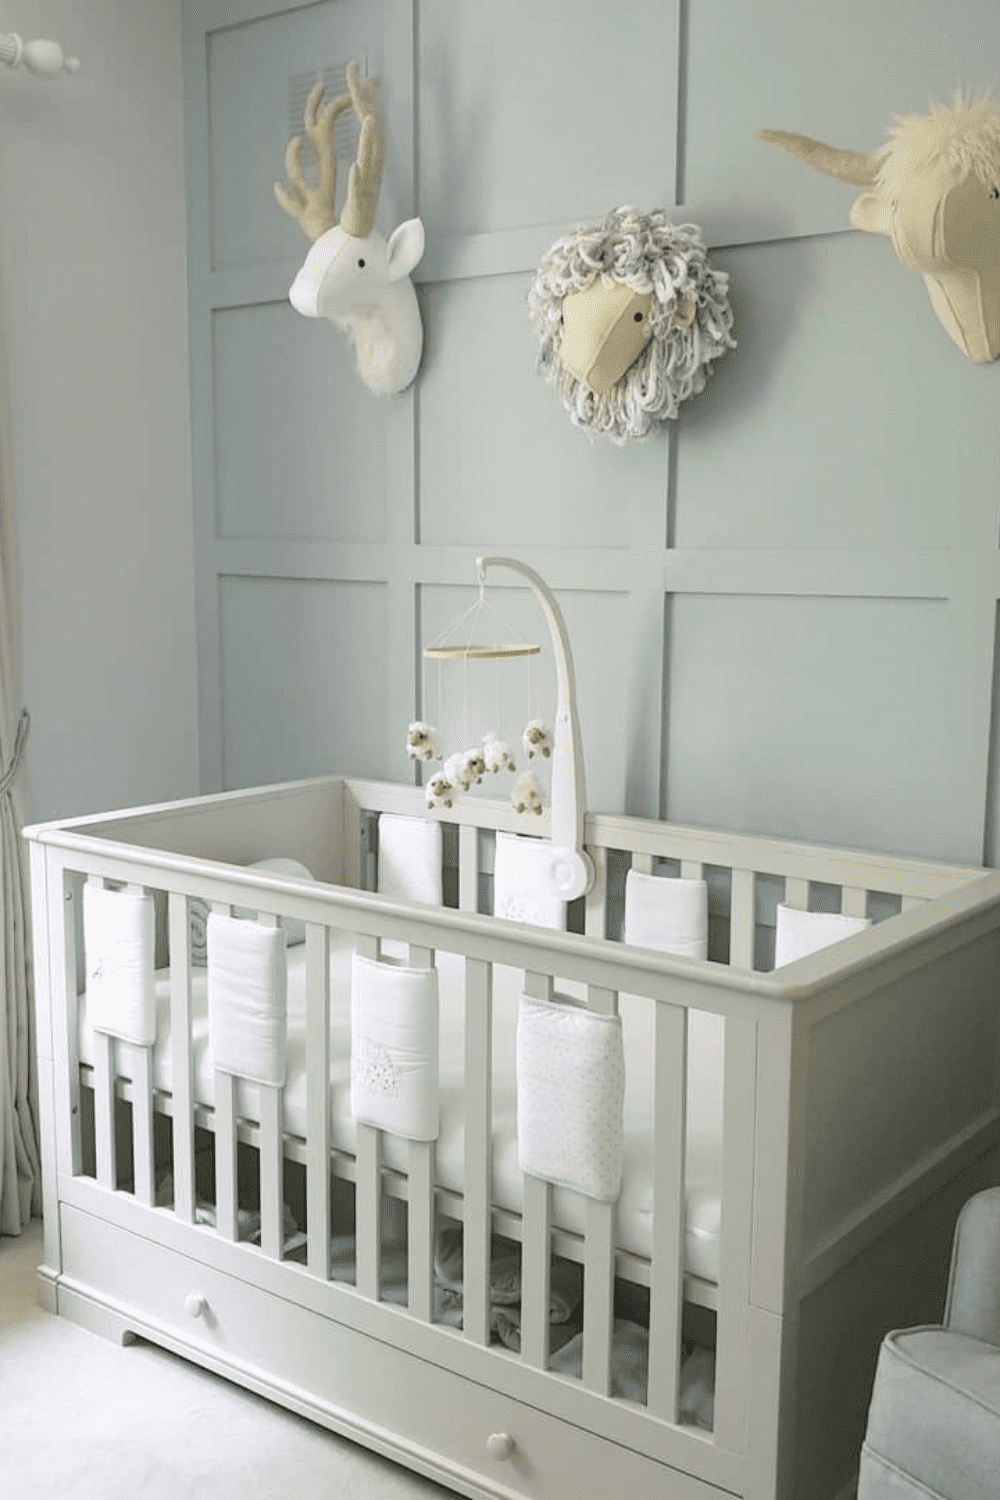 Baby room decor: the beginners guide to decorating a nursery | Better Homes  and Gardens